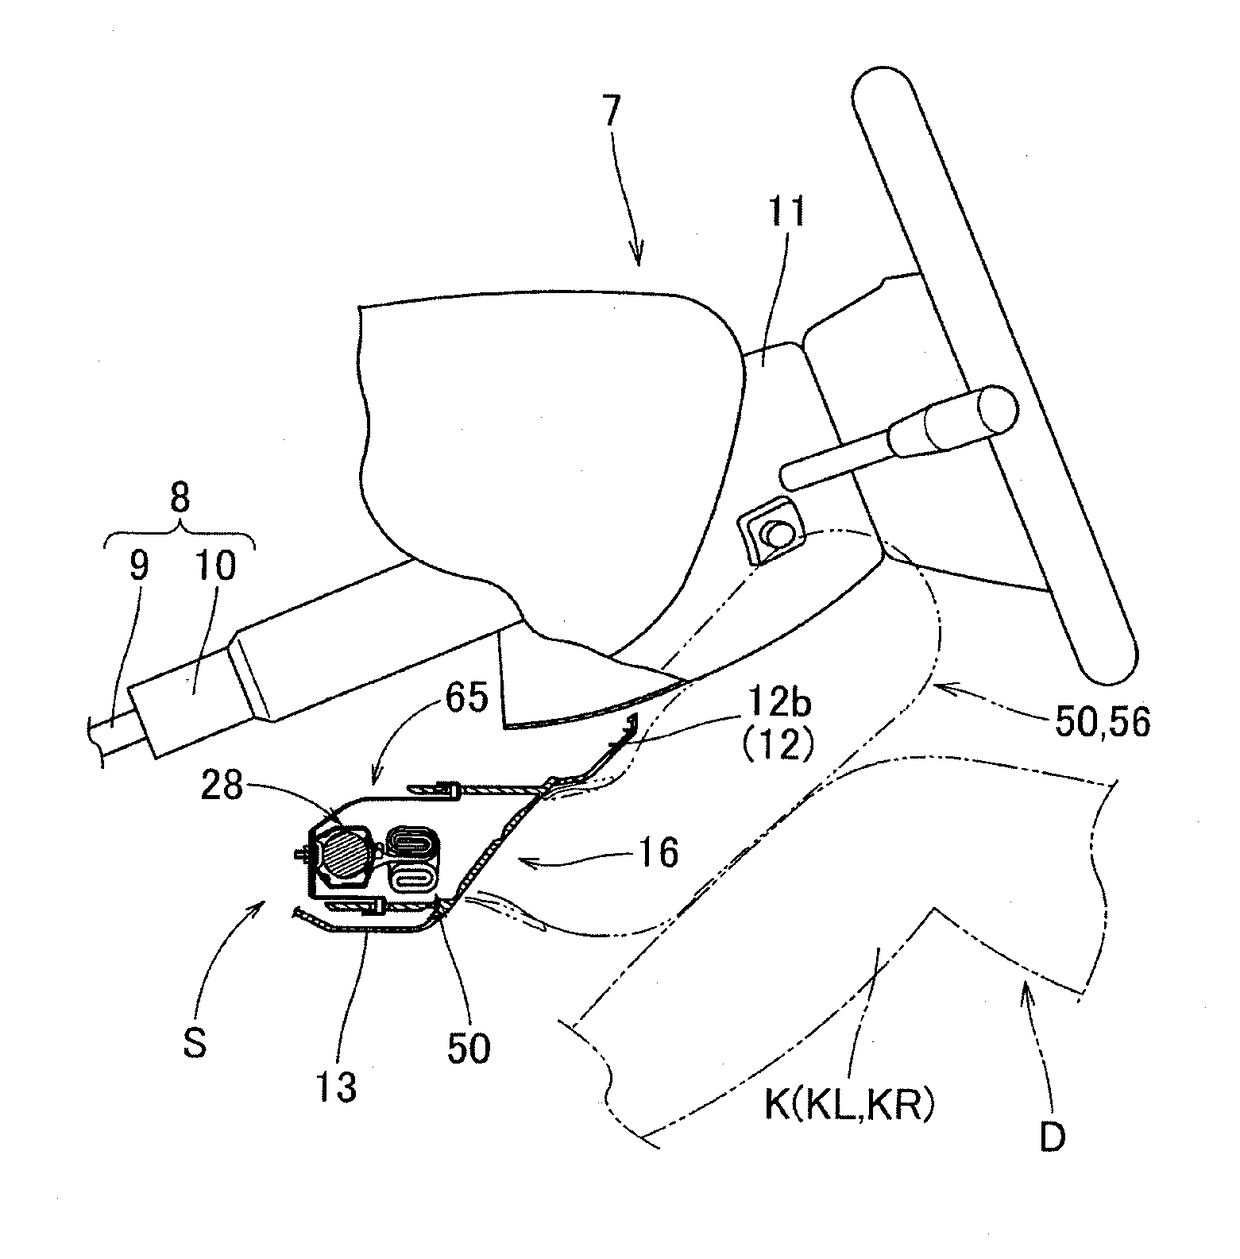 Knee-protection airbag device